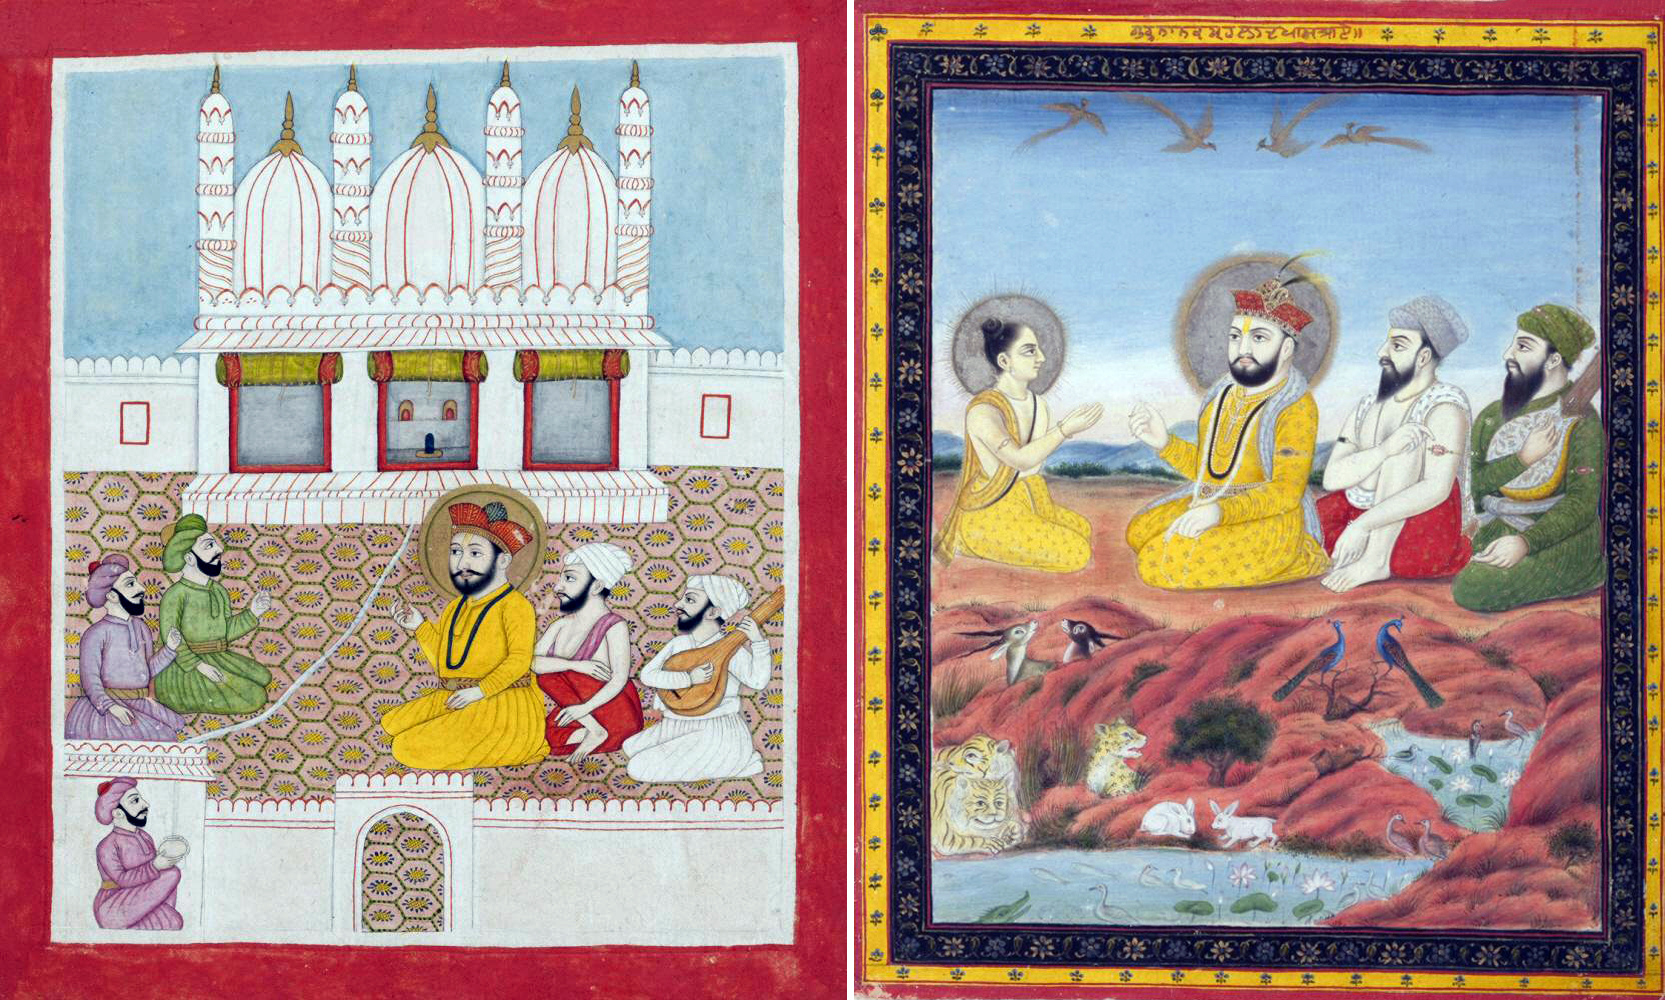 Two depictions of the founder of Sikhism. Guru Nanak converses with Muslim clerics (left) and Guru Nanak's meeting with Praladh (right), from a manuscript of the Janam Sakhi (Life Stories), 19th century (India or Pakistan, Punjab region), opaque watercolors and gold on paper, 20.3 x 17.1 cm (left) and 20.6 x 17.1 cm (right) (Asian Art Museum, San Francisco)